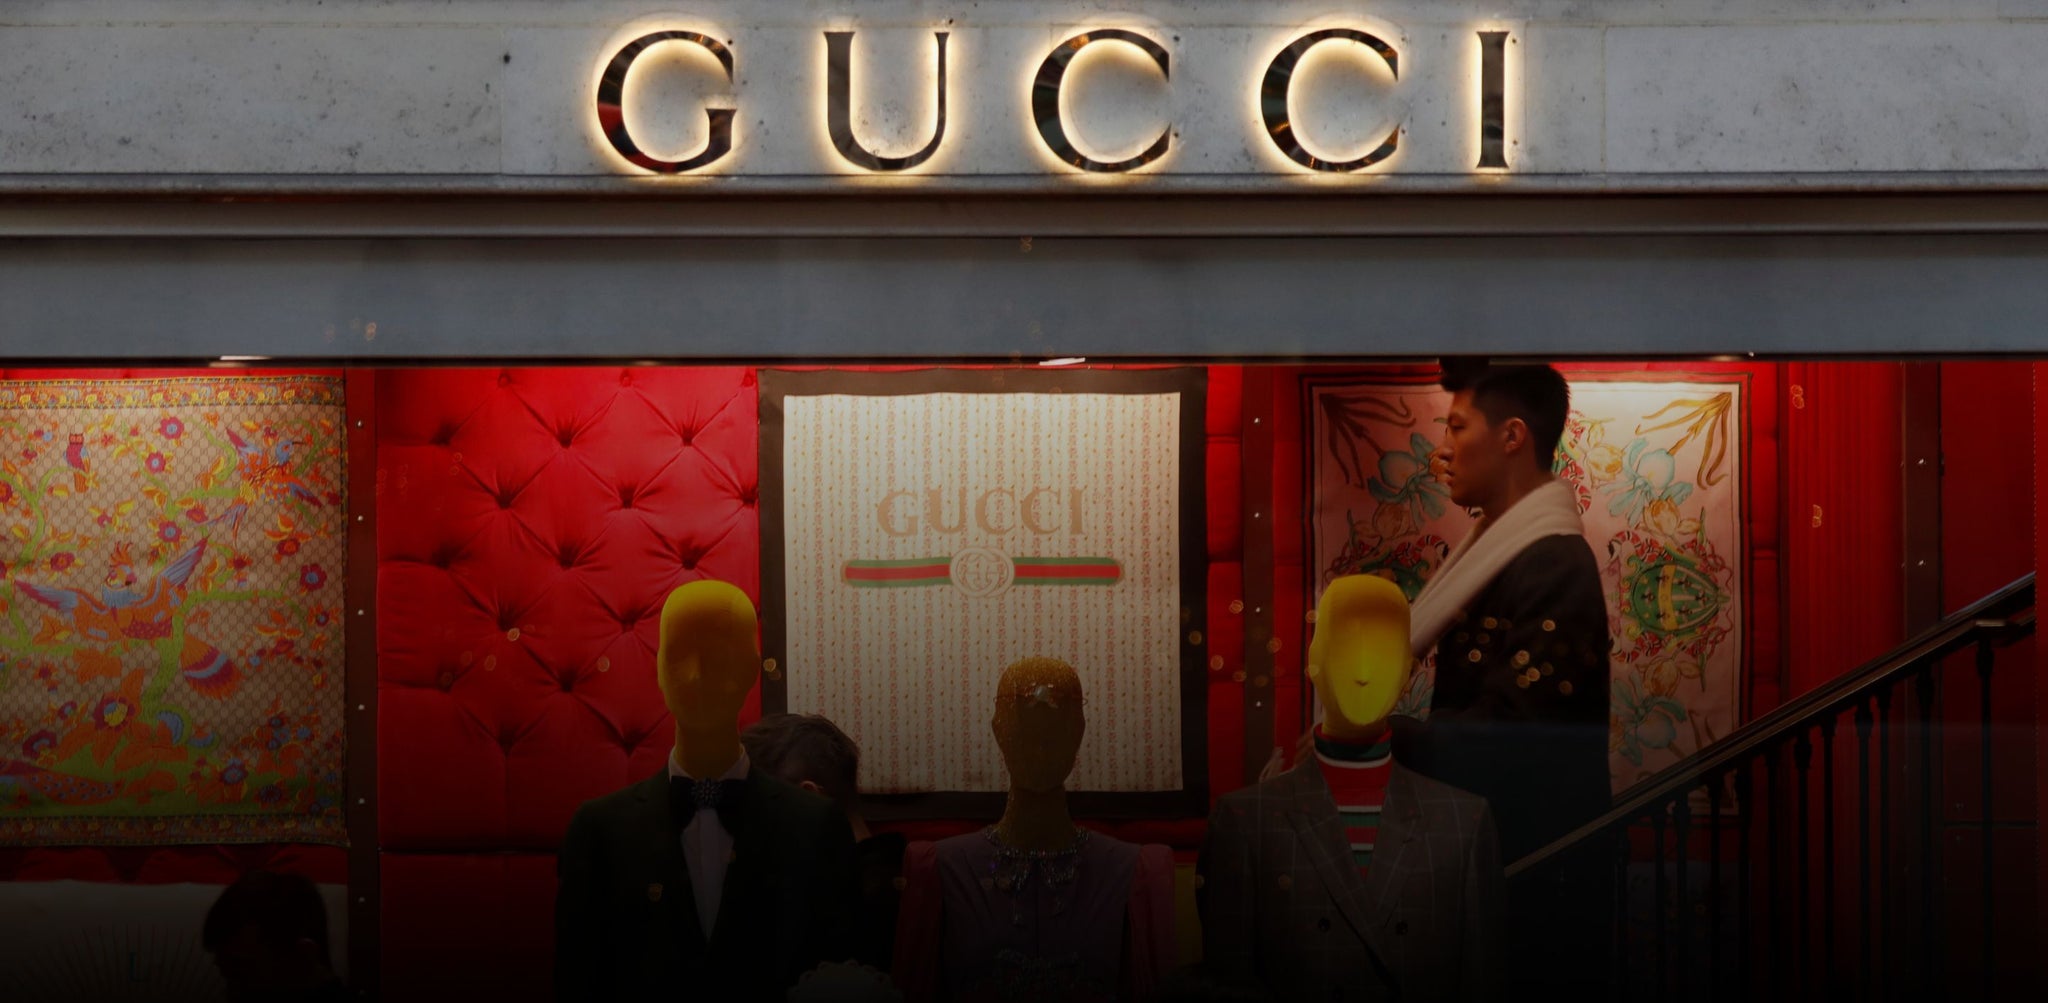 How did Gucci manage to become one of the most successful luxury